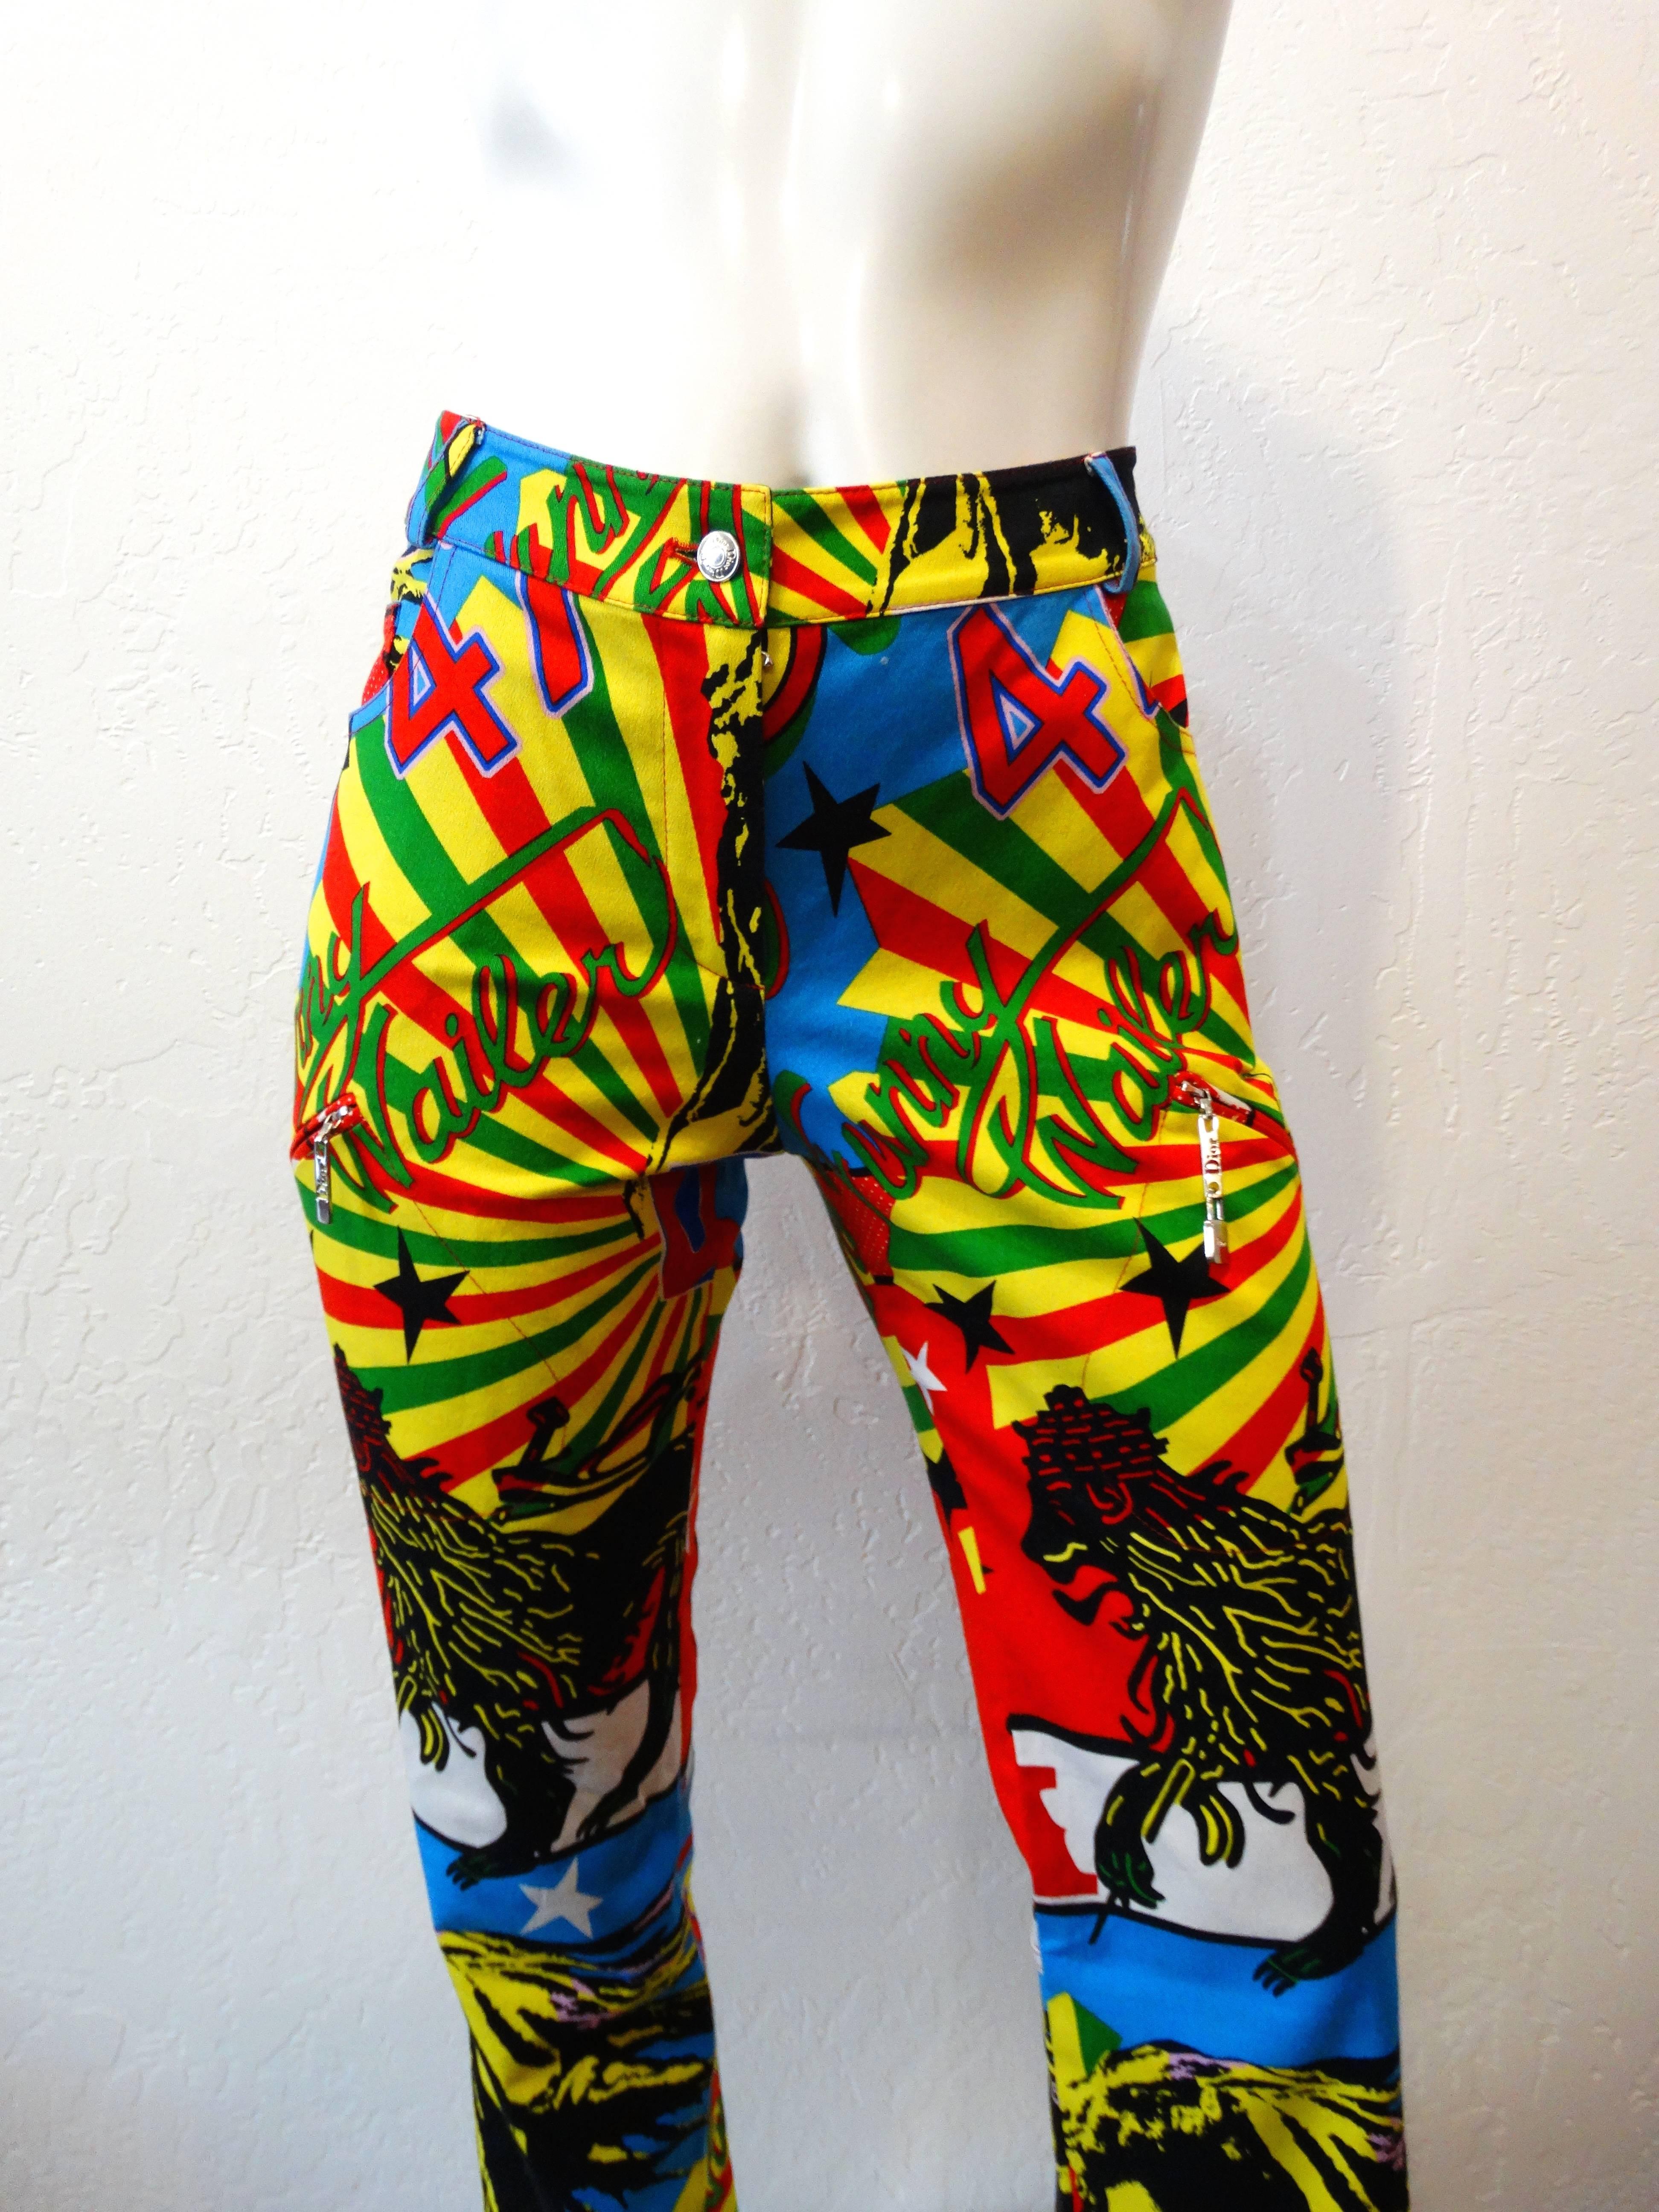 These pants are tie-dye for! Amazing Christian Dior by John Galliano graphic printed pants! Woven cotton pant covered in bright and bold Rastafarian inspired prints, including motifs of Marley and Dior. High rise fit and tapered leg that flare